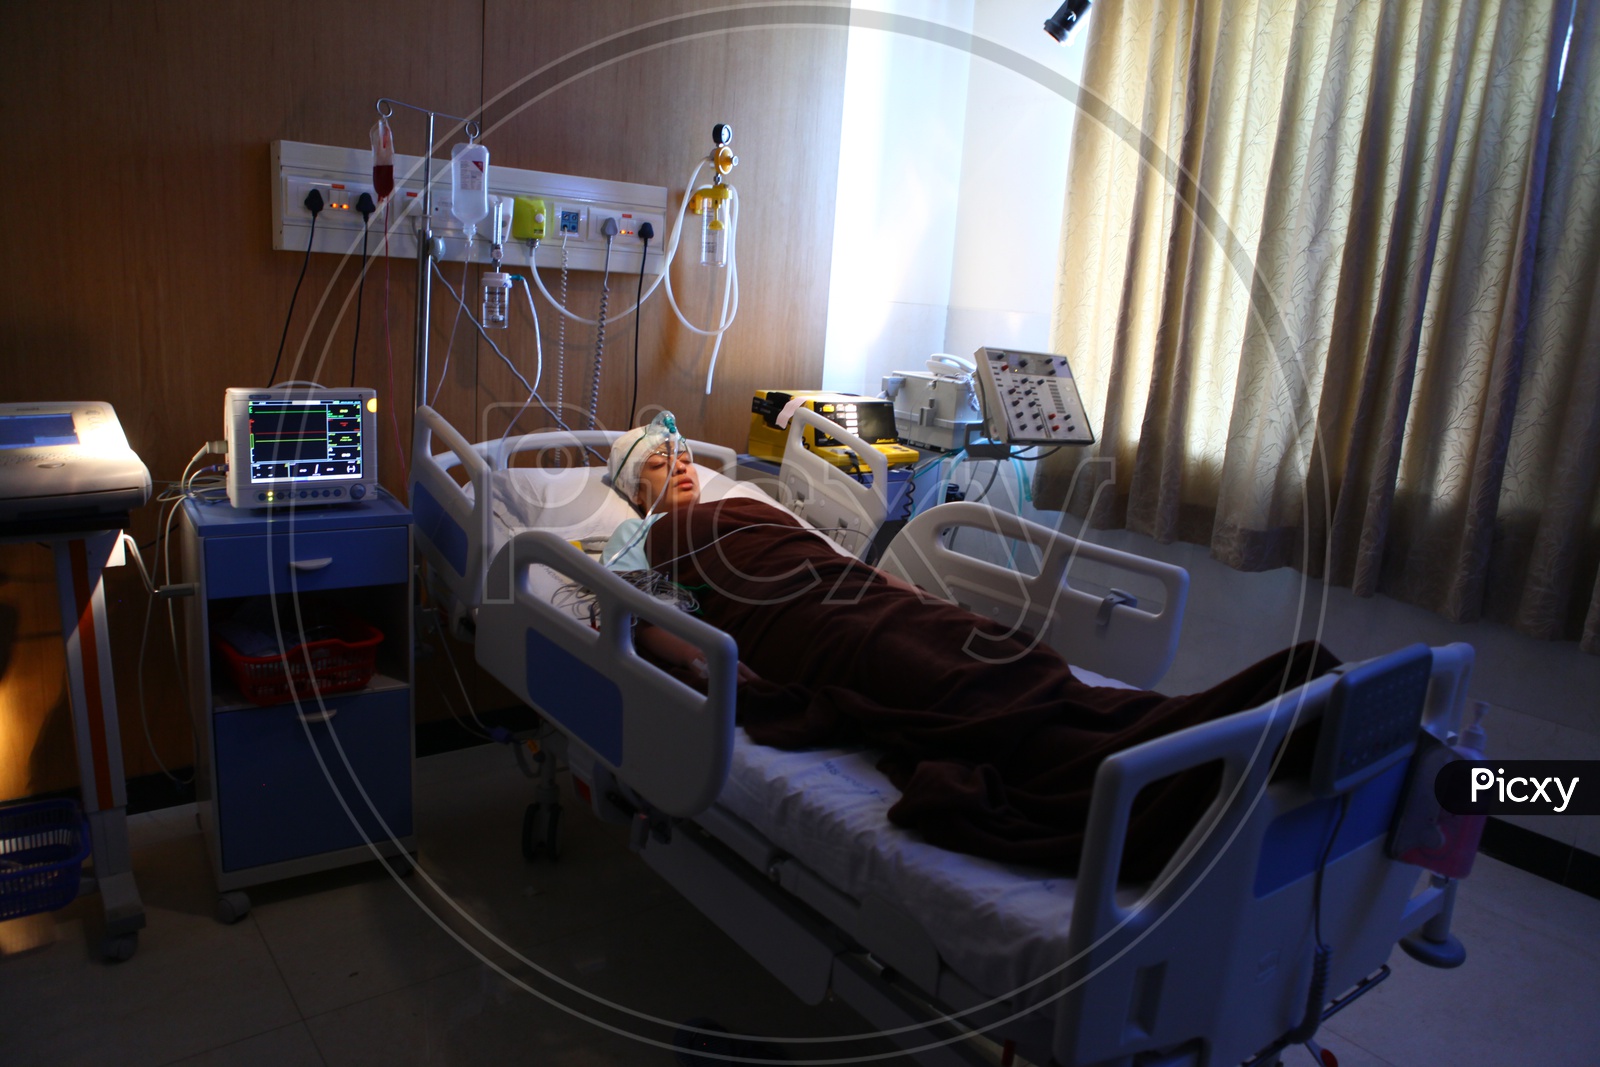 A Lady Patient in a Hospital Bed